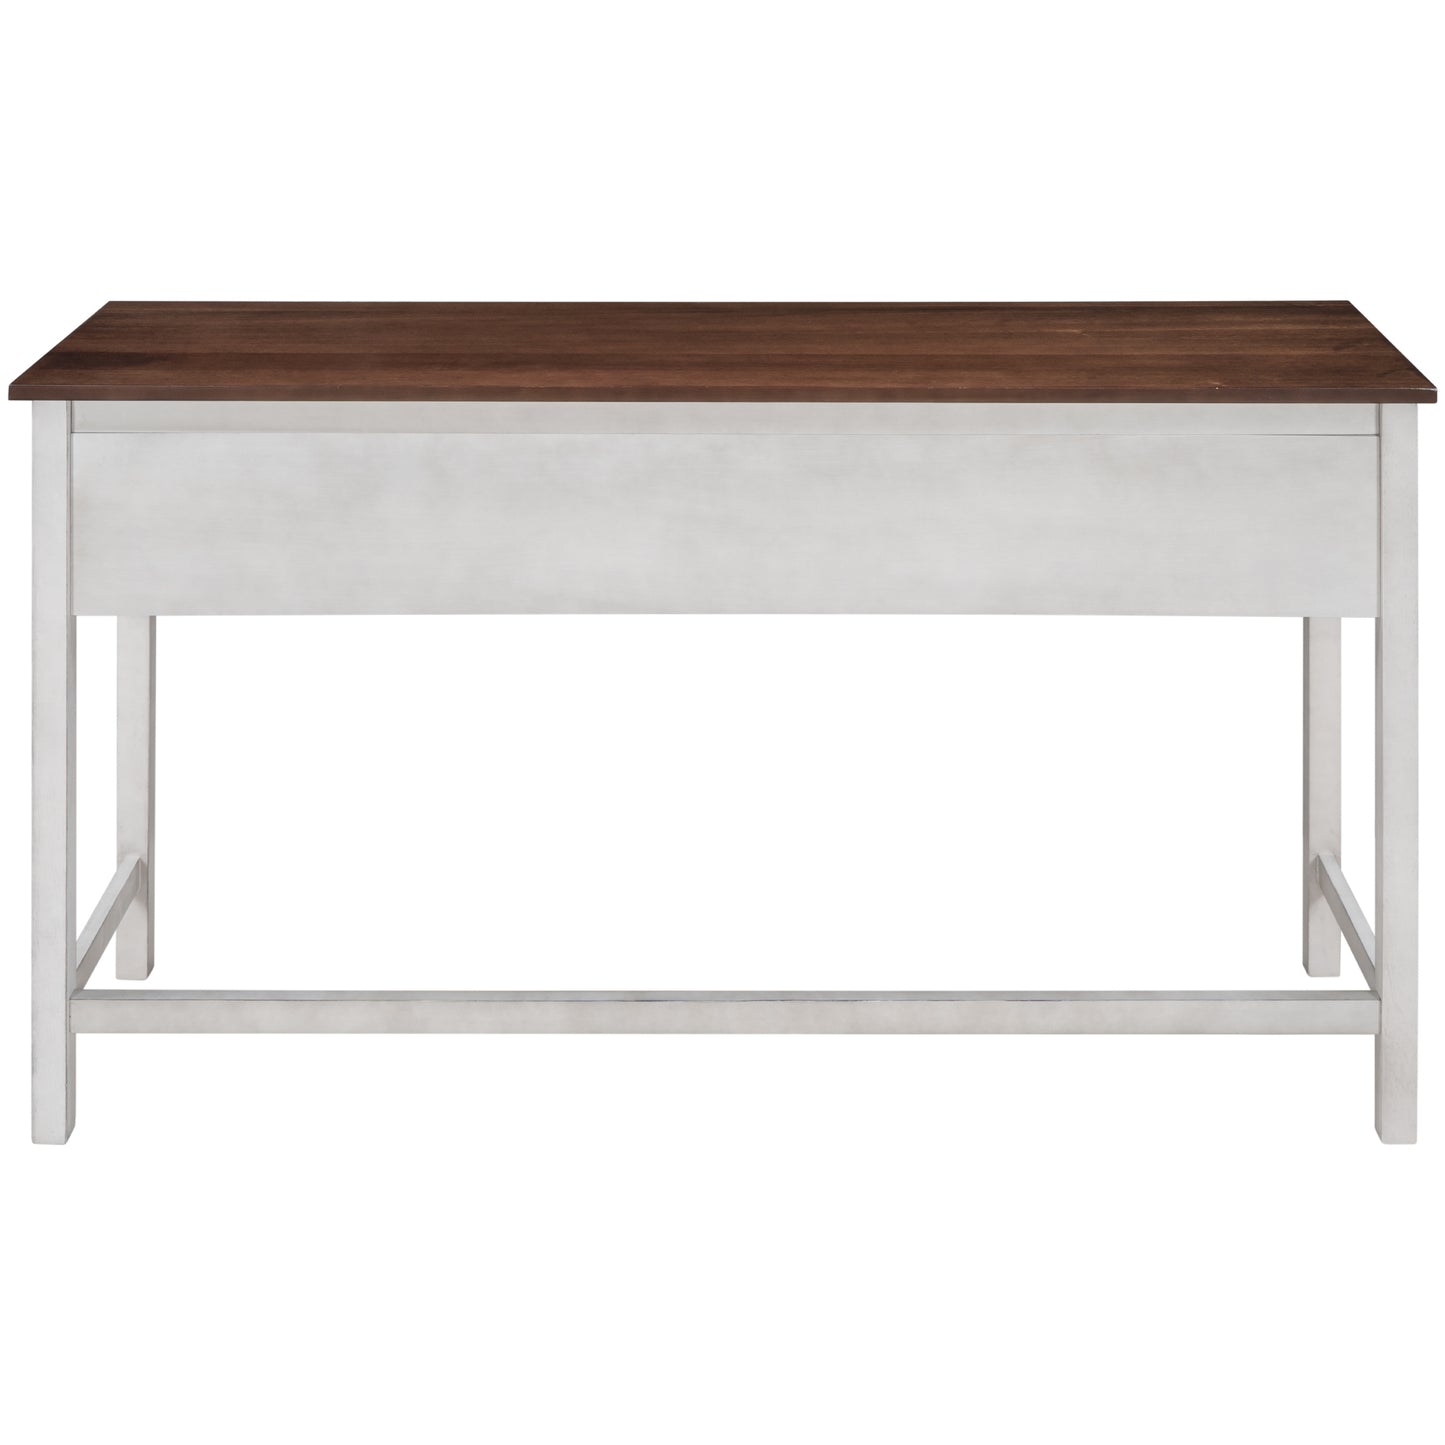 Counter Height Table - Demine Essentials